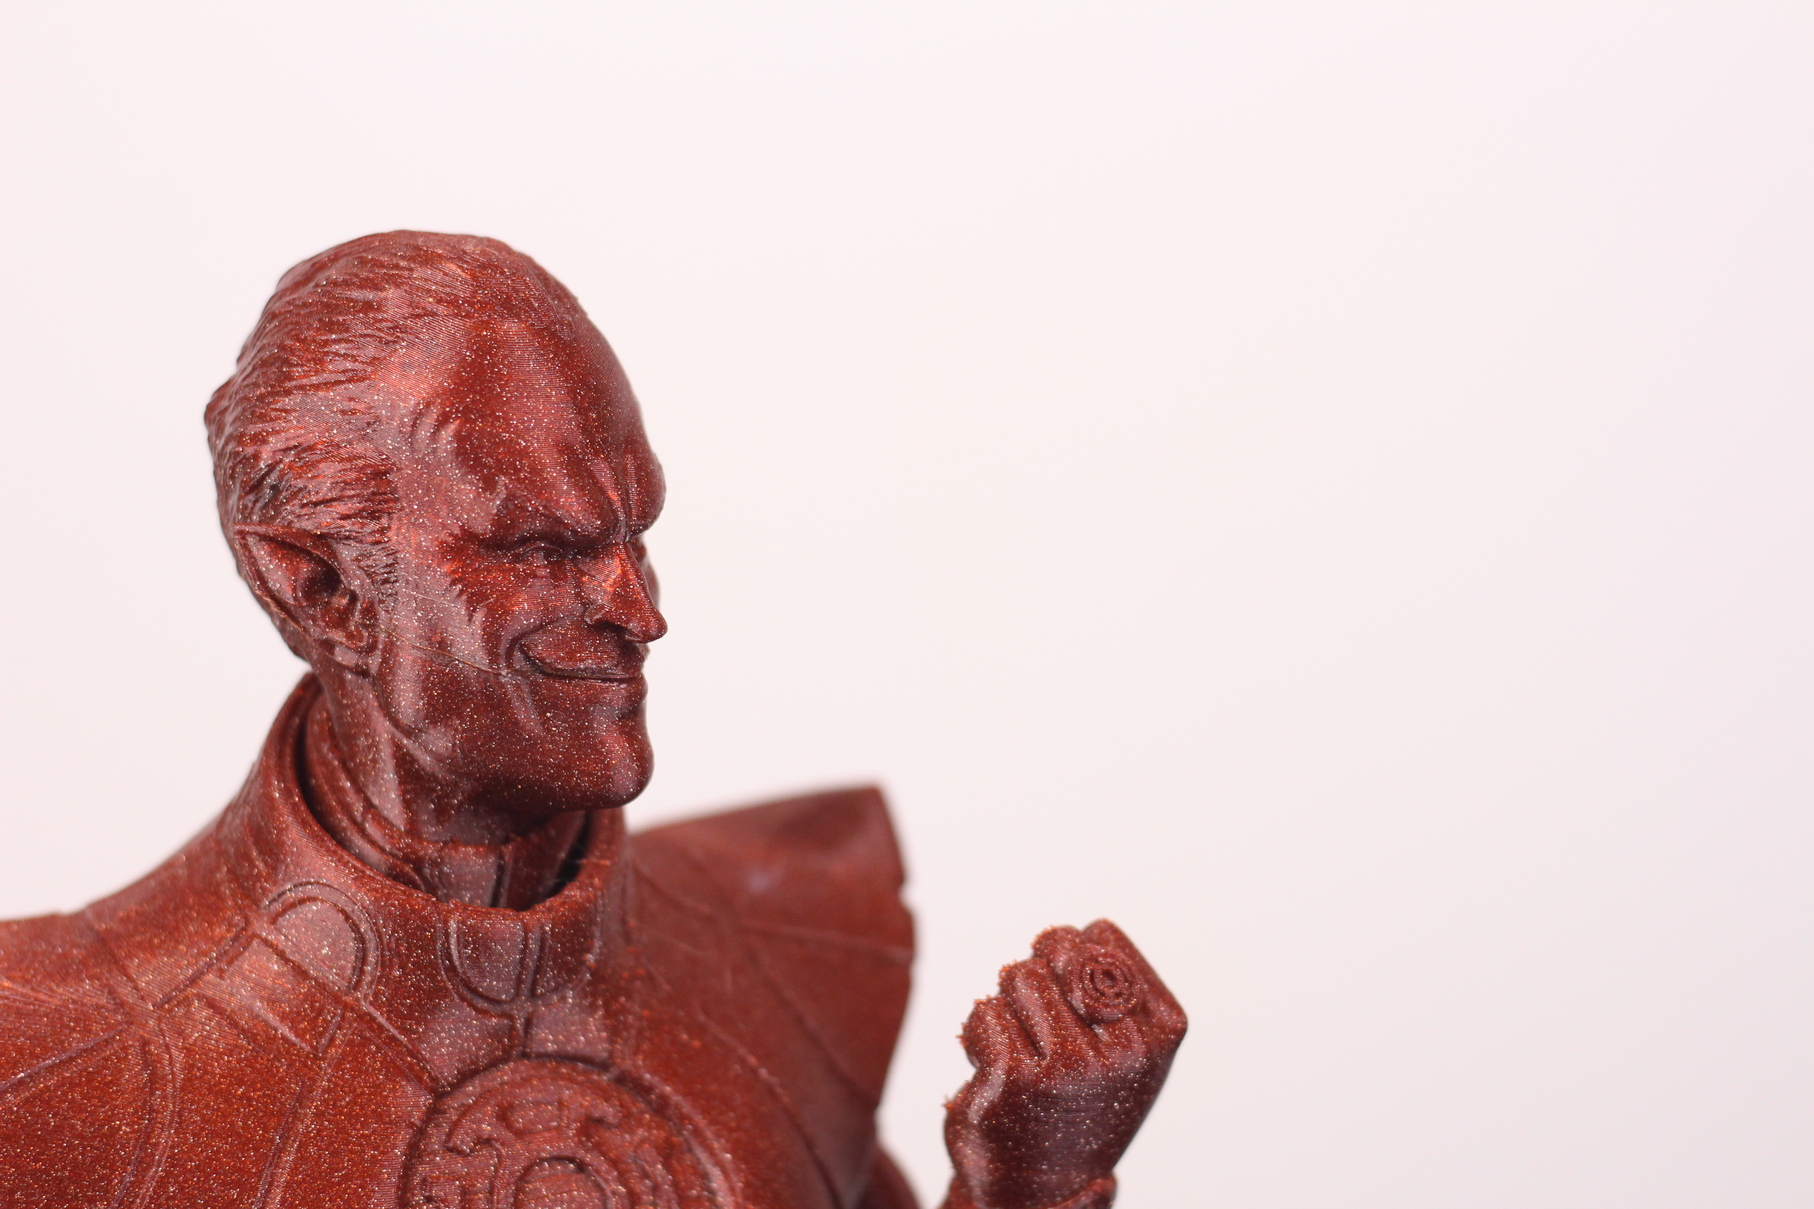 Sinestro Bust printed on the BIQU B1 SE Plus 2 | BIQU B1 SE PLUS Review: SKR 2 and ABL from Factory